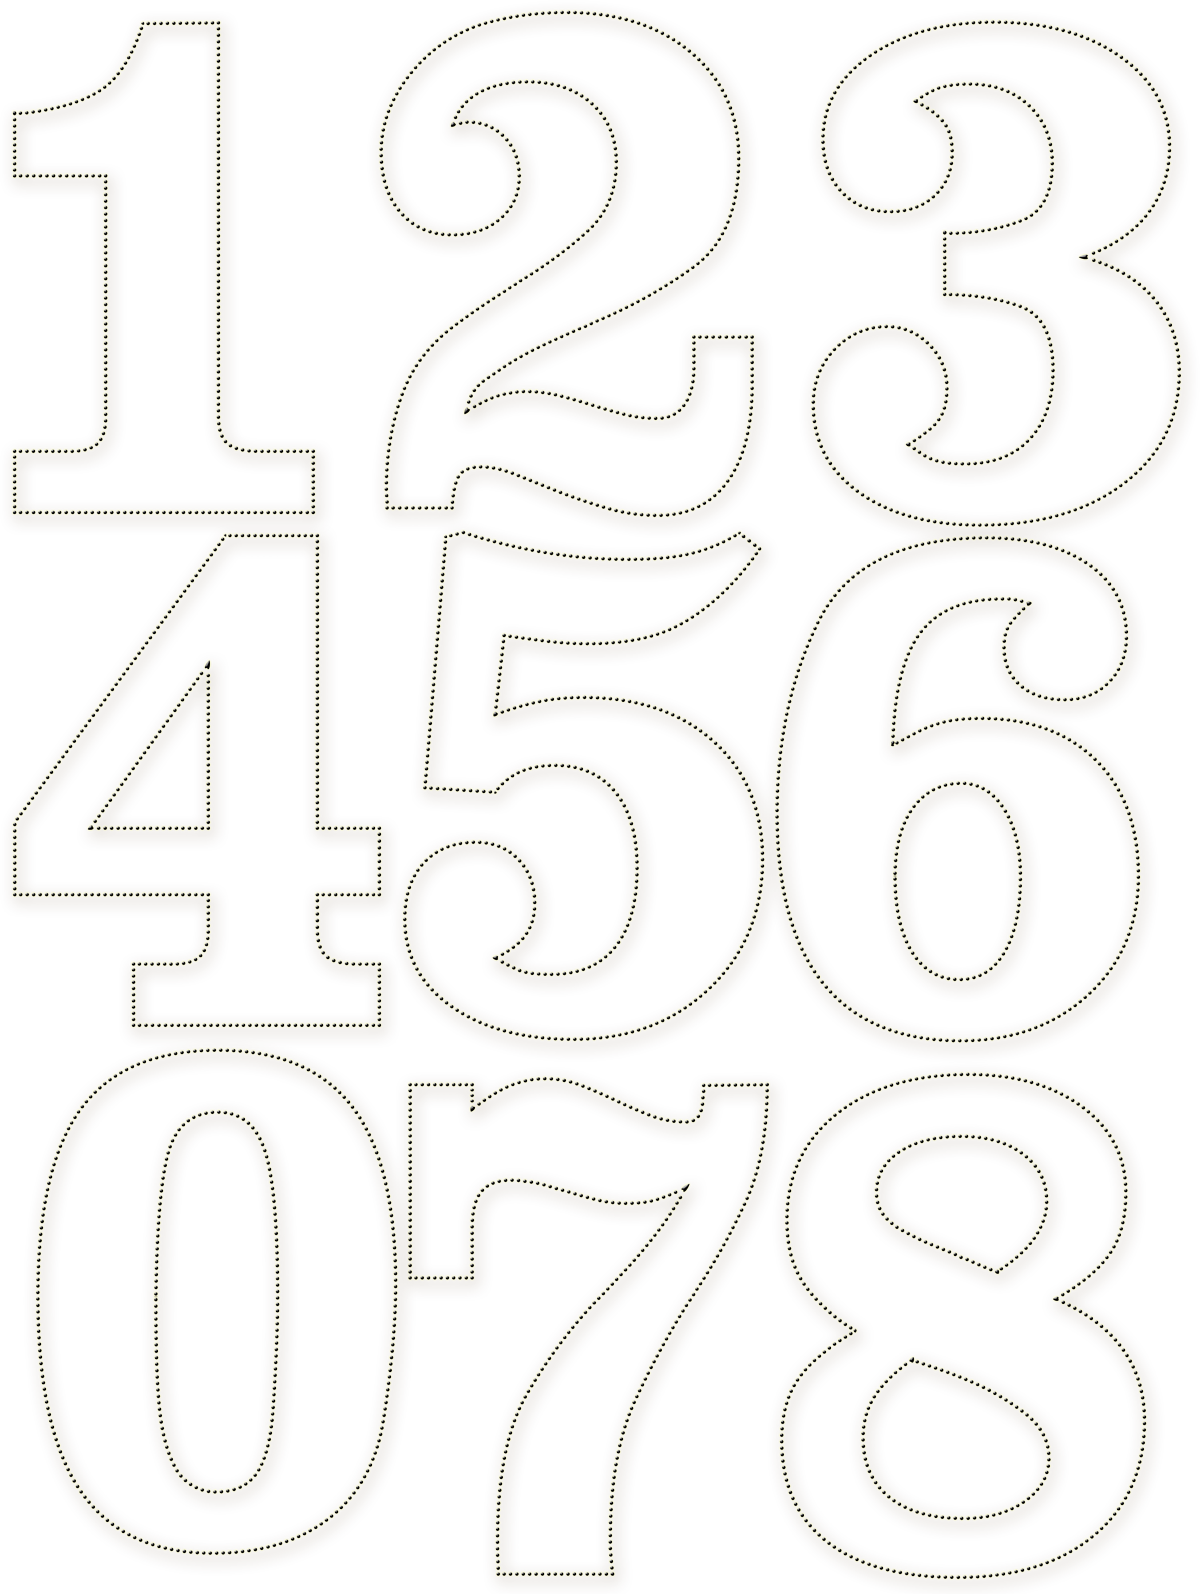 Dotted Outlined Numbers Not 9by11 4by5 Png 1200 1594 Applique Patterns Coloring Pages Mosaic